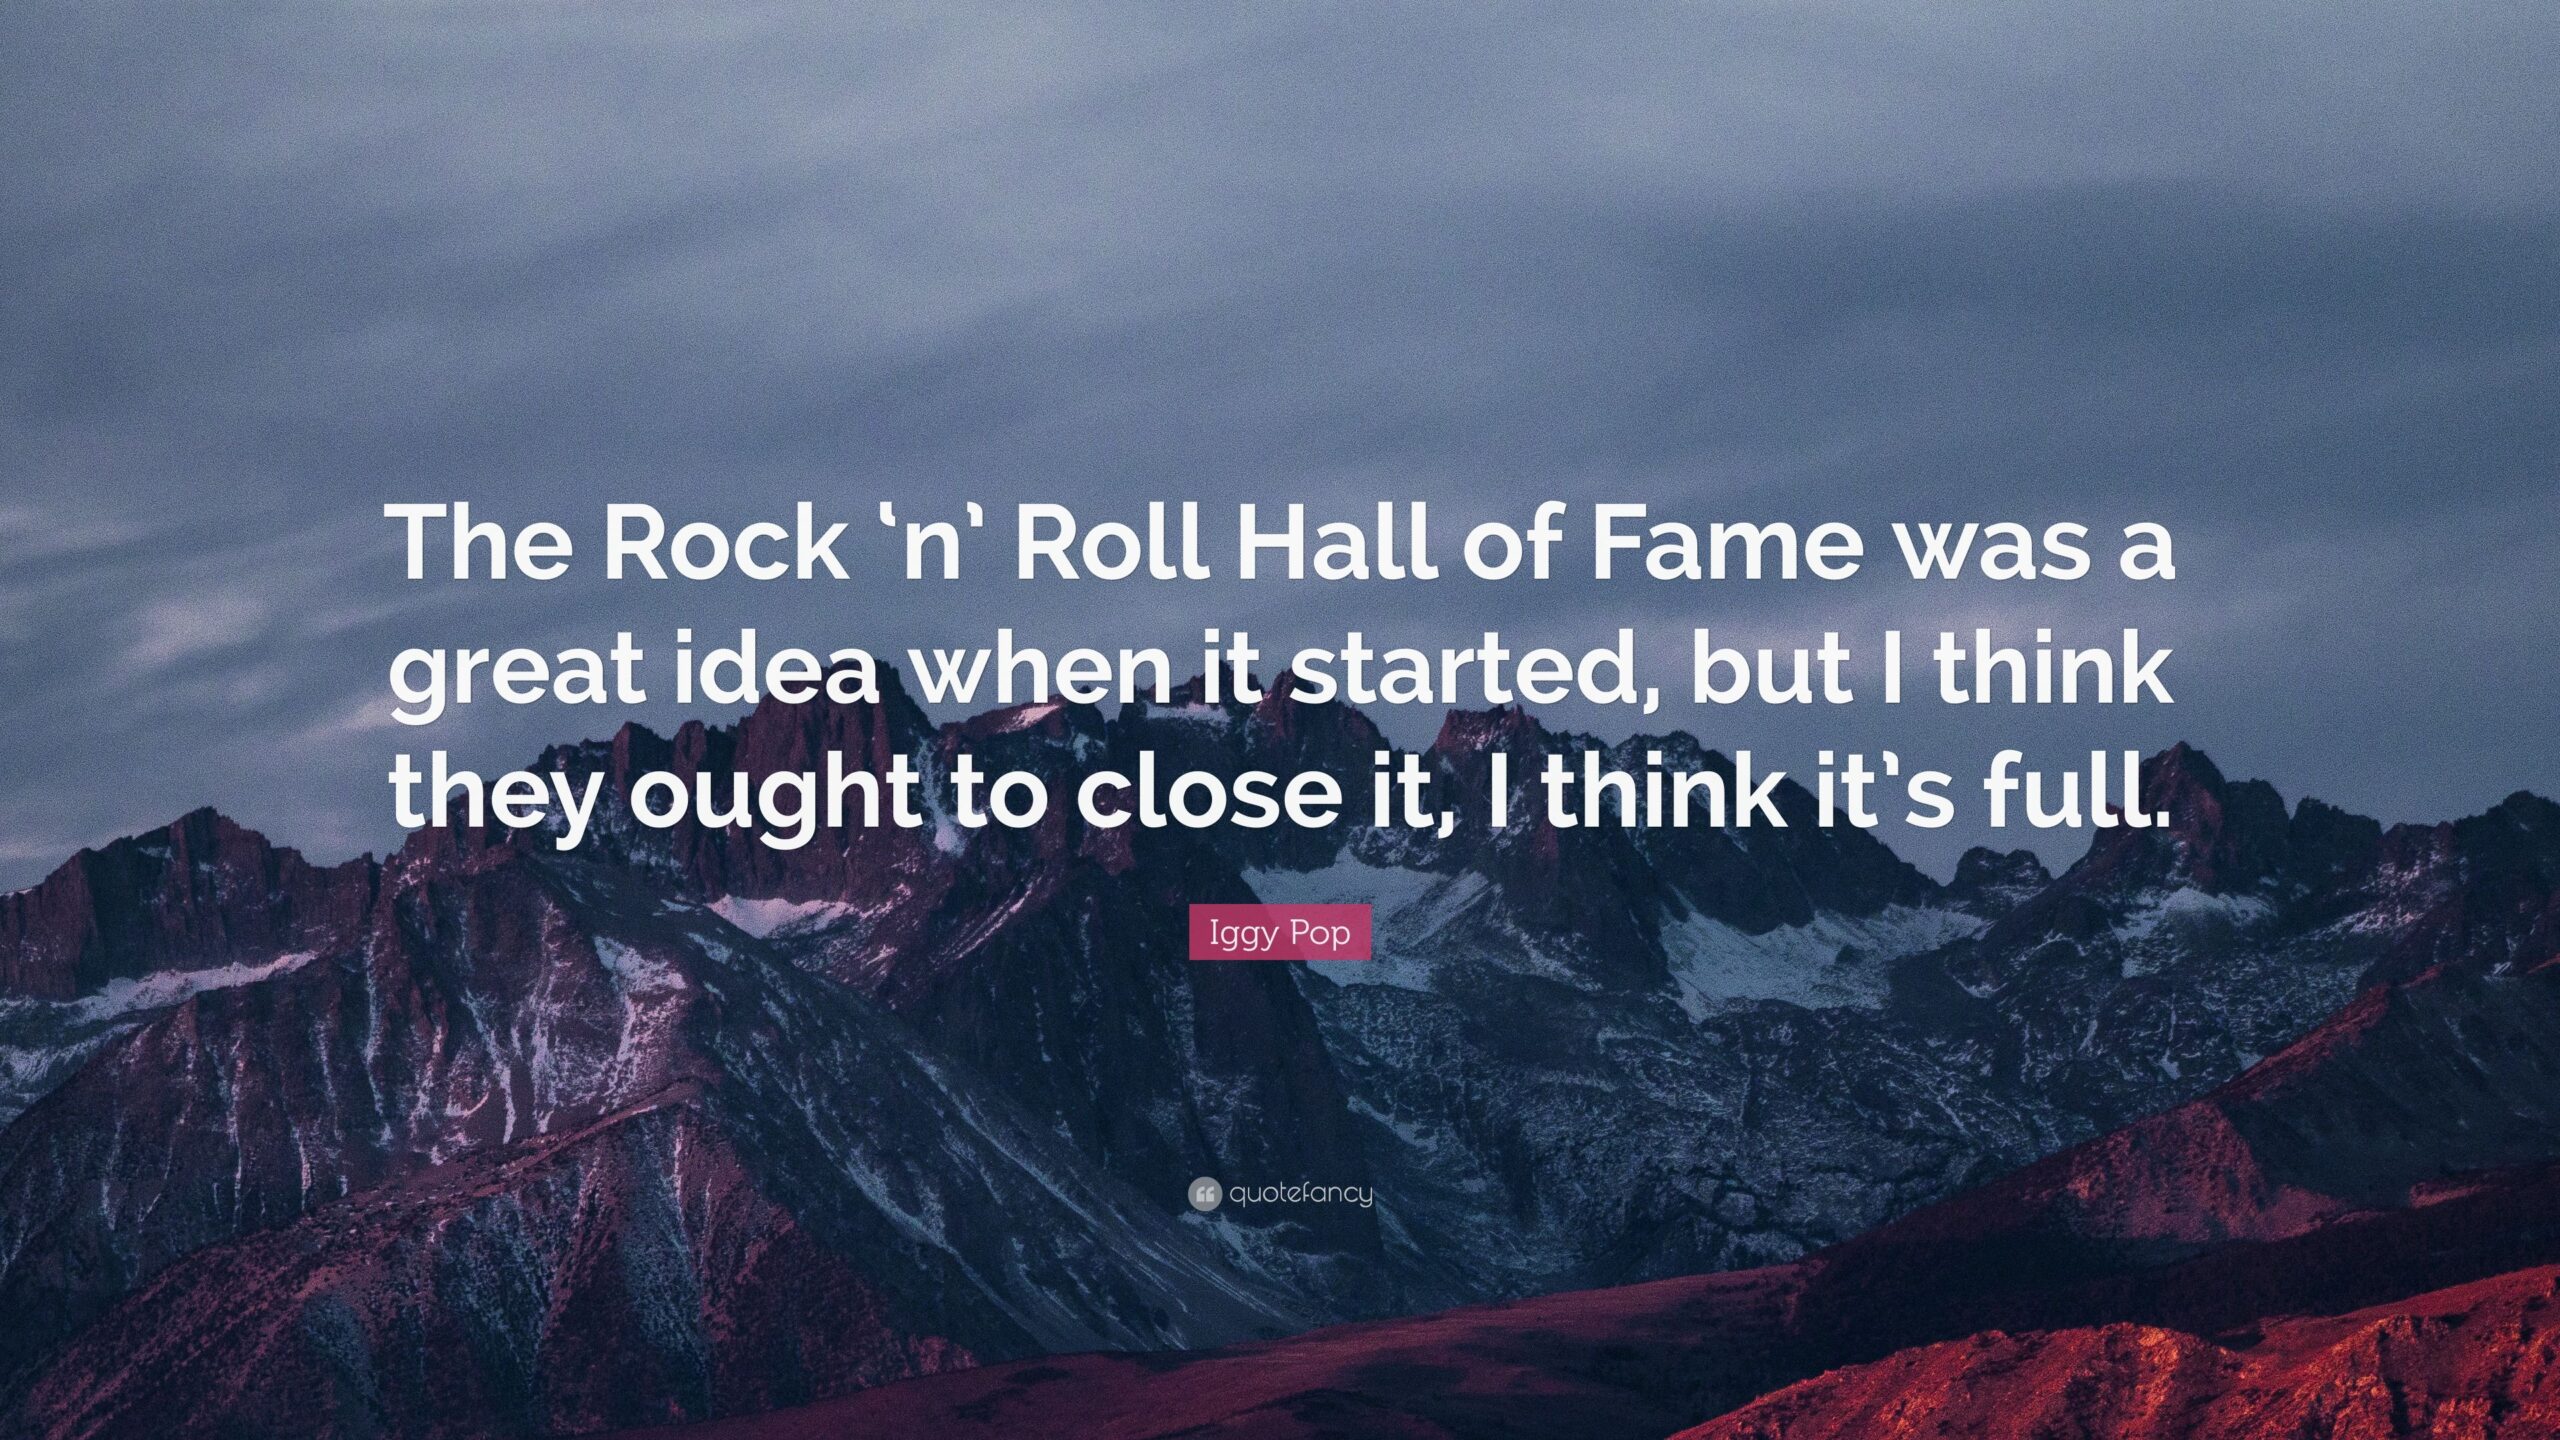 Iggy Pop Quote “The Rock ‘n’ Roll Hall of Fame was a great idea